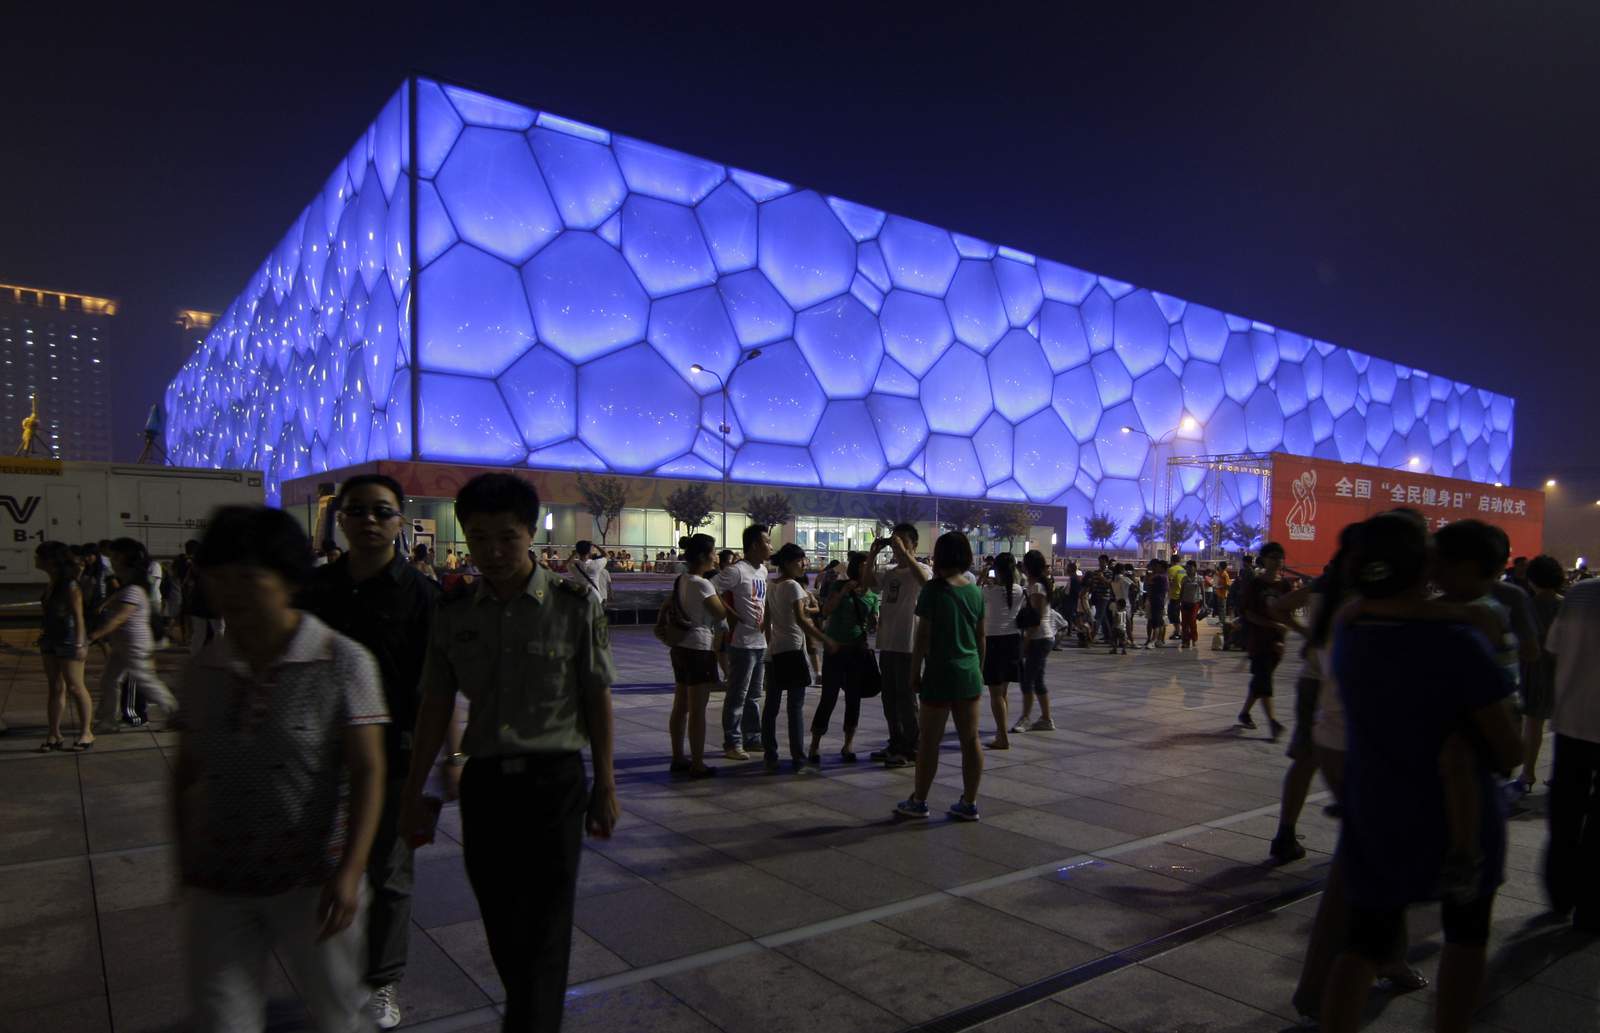 Bird's Nest and Water Cube: Beijing venues were stars, too